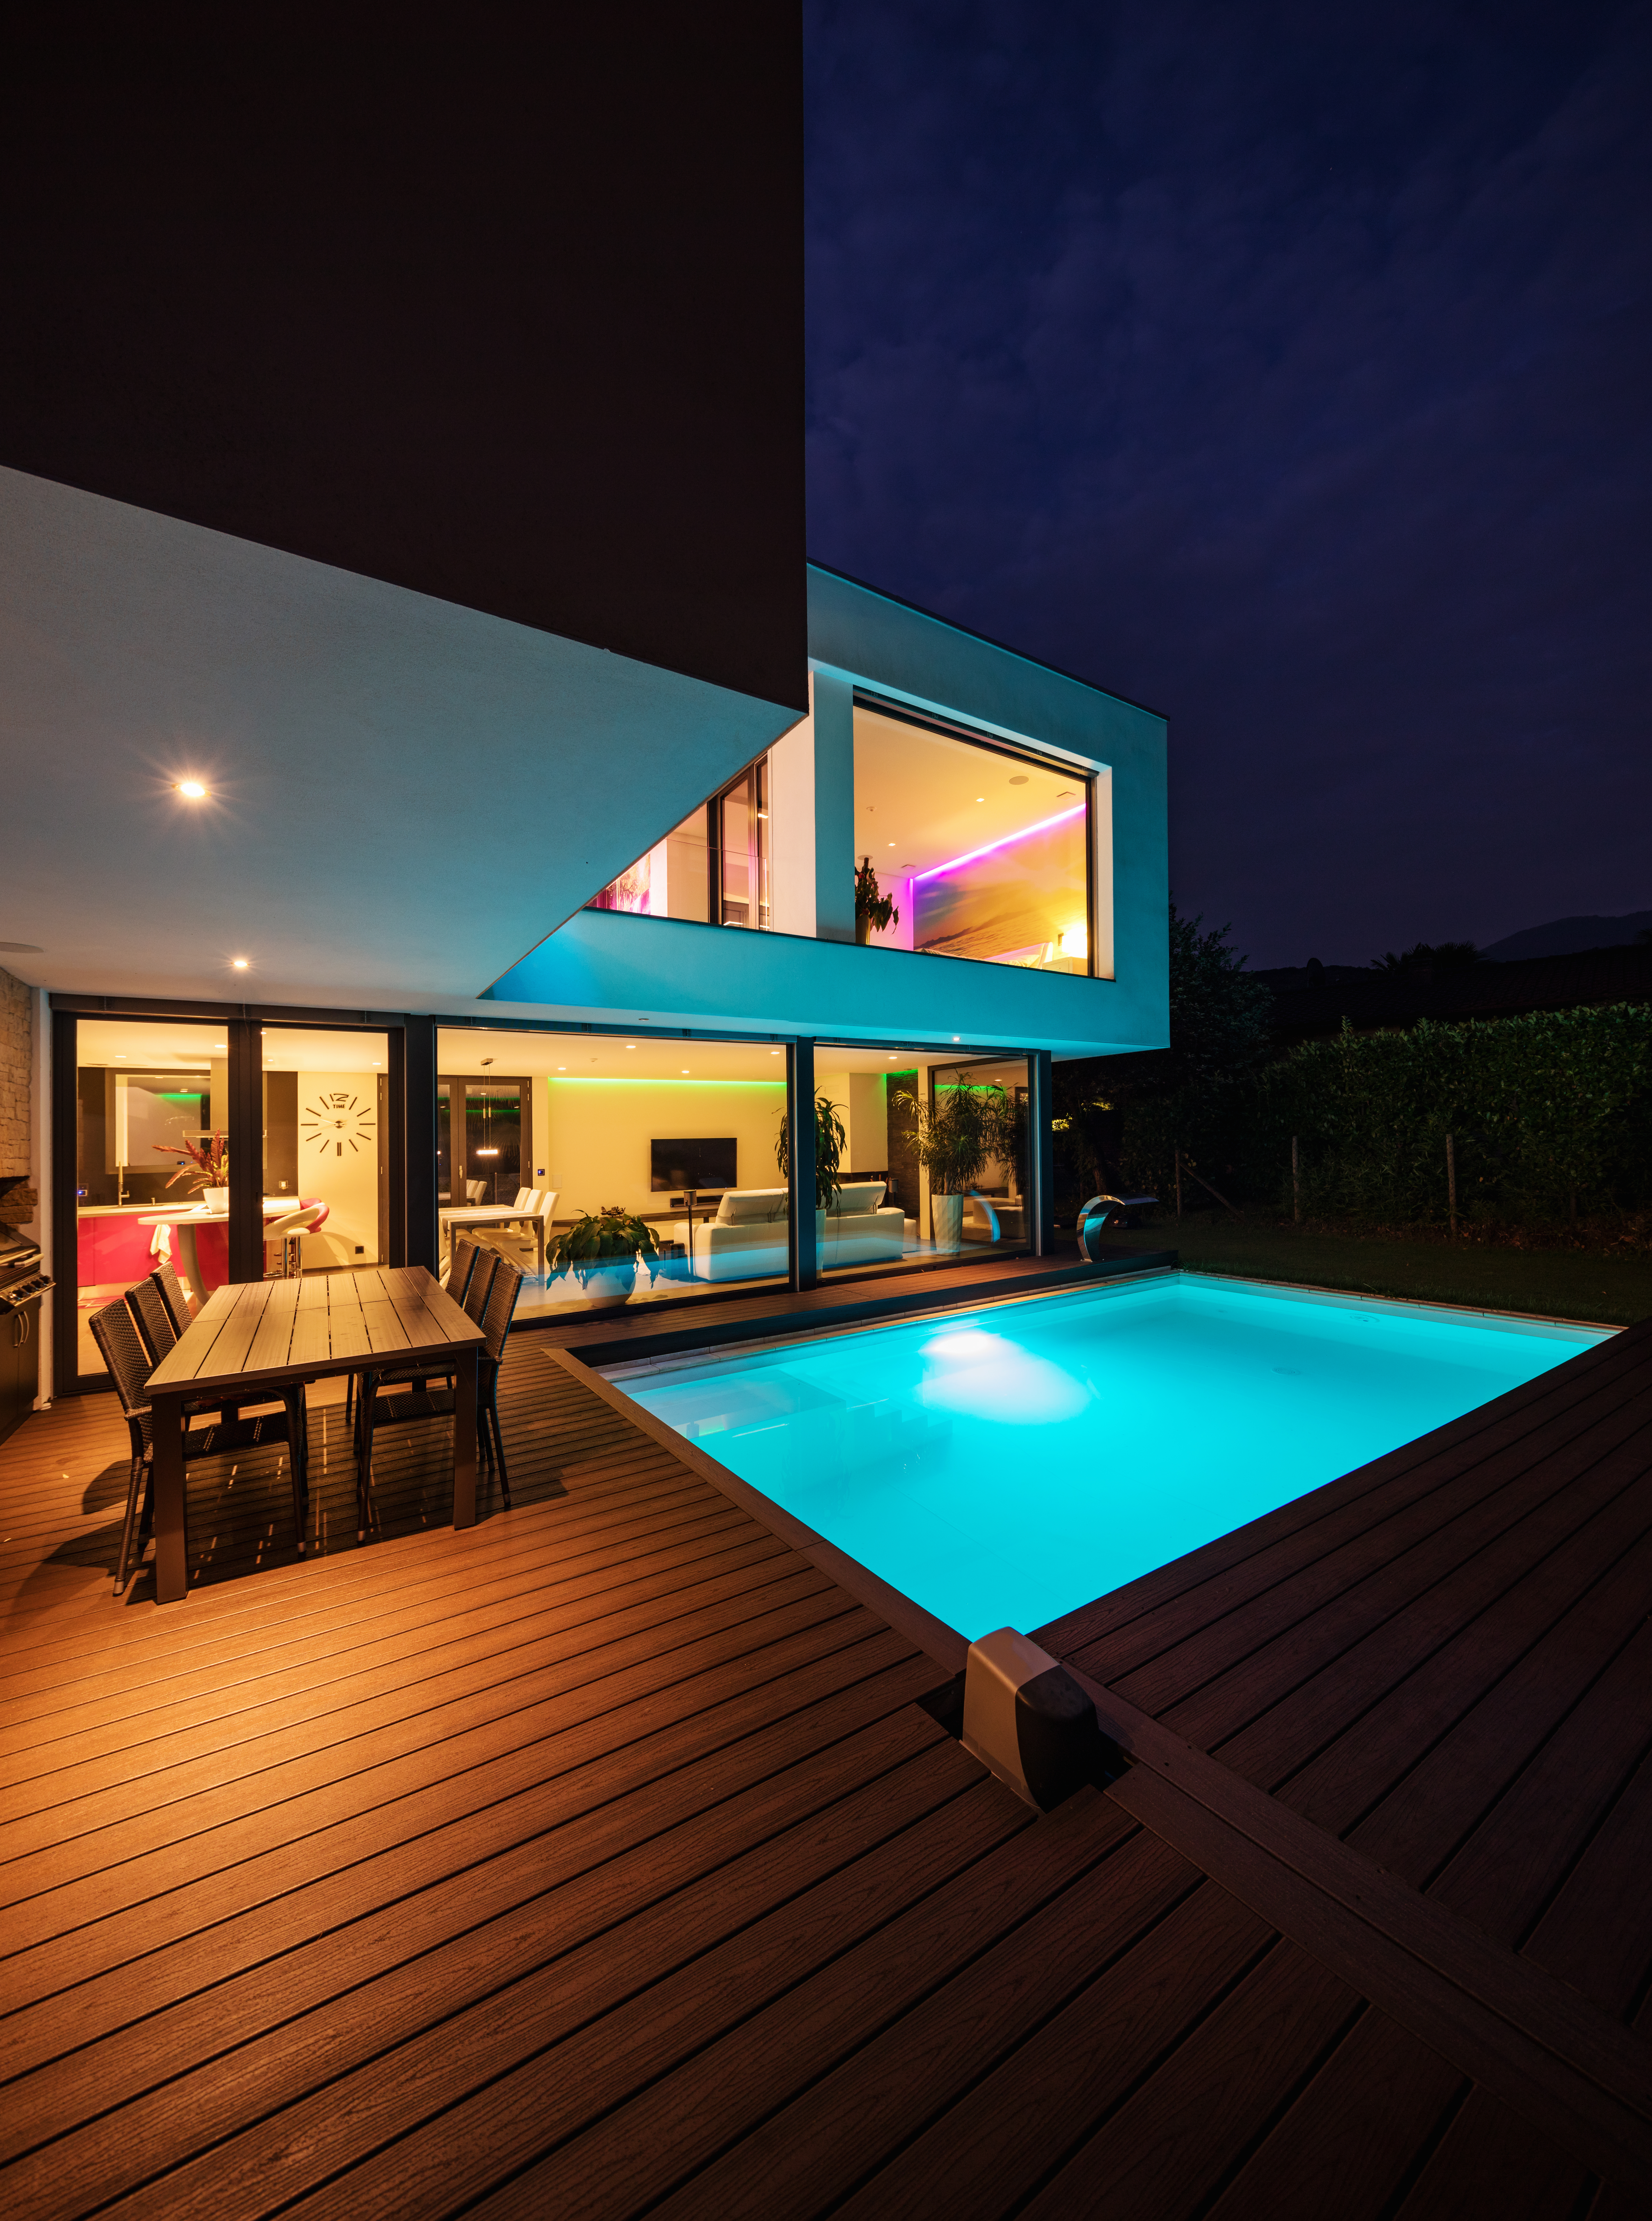 A house with a small outdoor pool, featuring underwater lighting that adds a subtle and enchanting glow to the water, creating an inviting and visually appealing atmosphere.